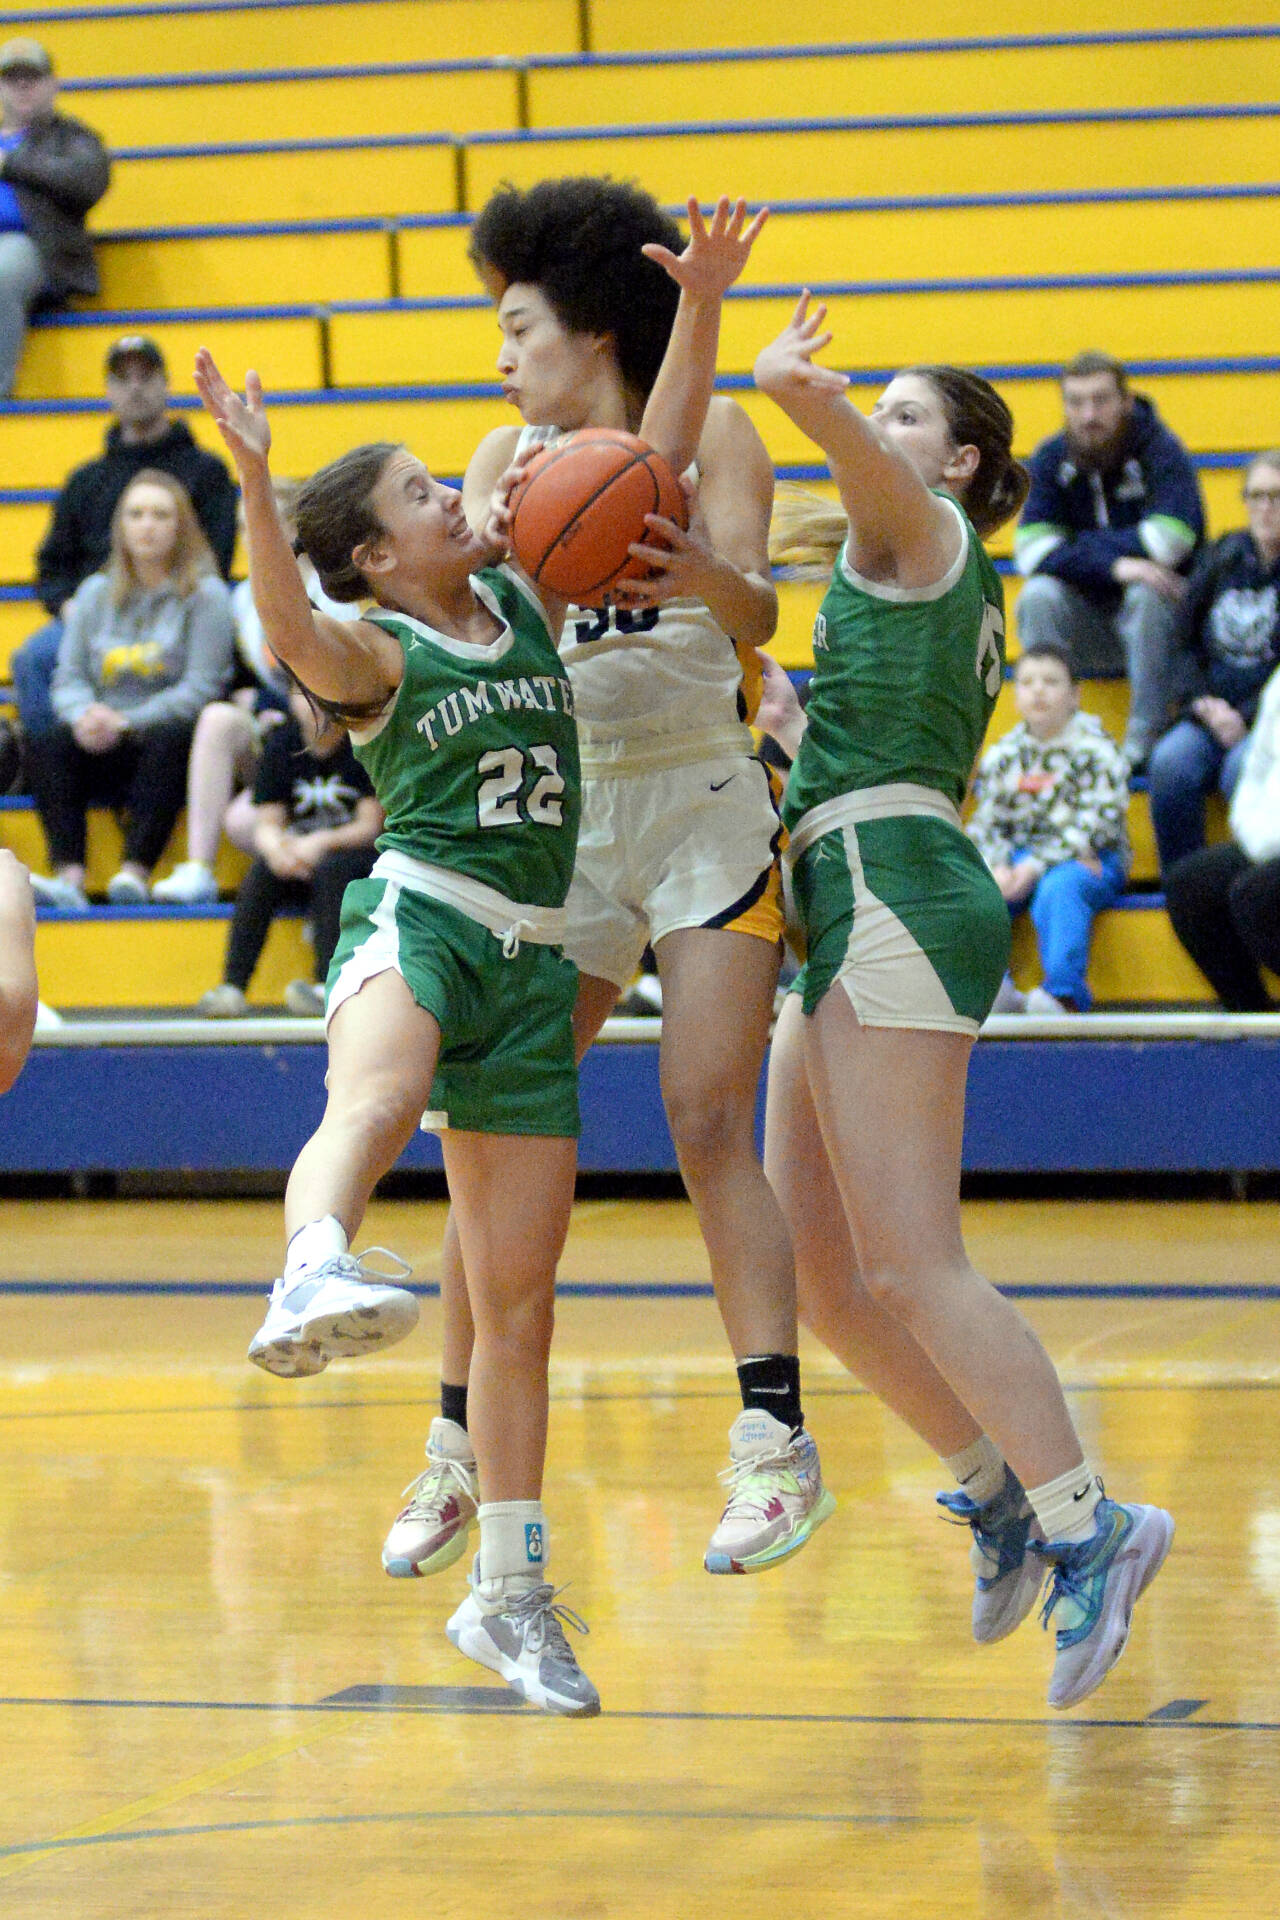 RYAN SPARKS | THE DAILY WORLD Aberdeen senior guard Maddie Gore (30) is fouled while grabbing a rebound against Tumwater’s Regan Brewer (22) and Kendall Gjurasic during the Bobcats’ 65-32 loss on Friday at Sam Benn Gym in Aberdeen.